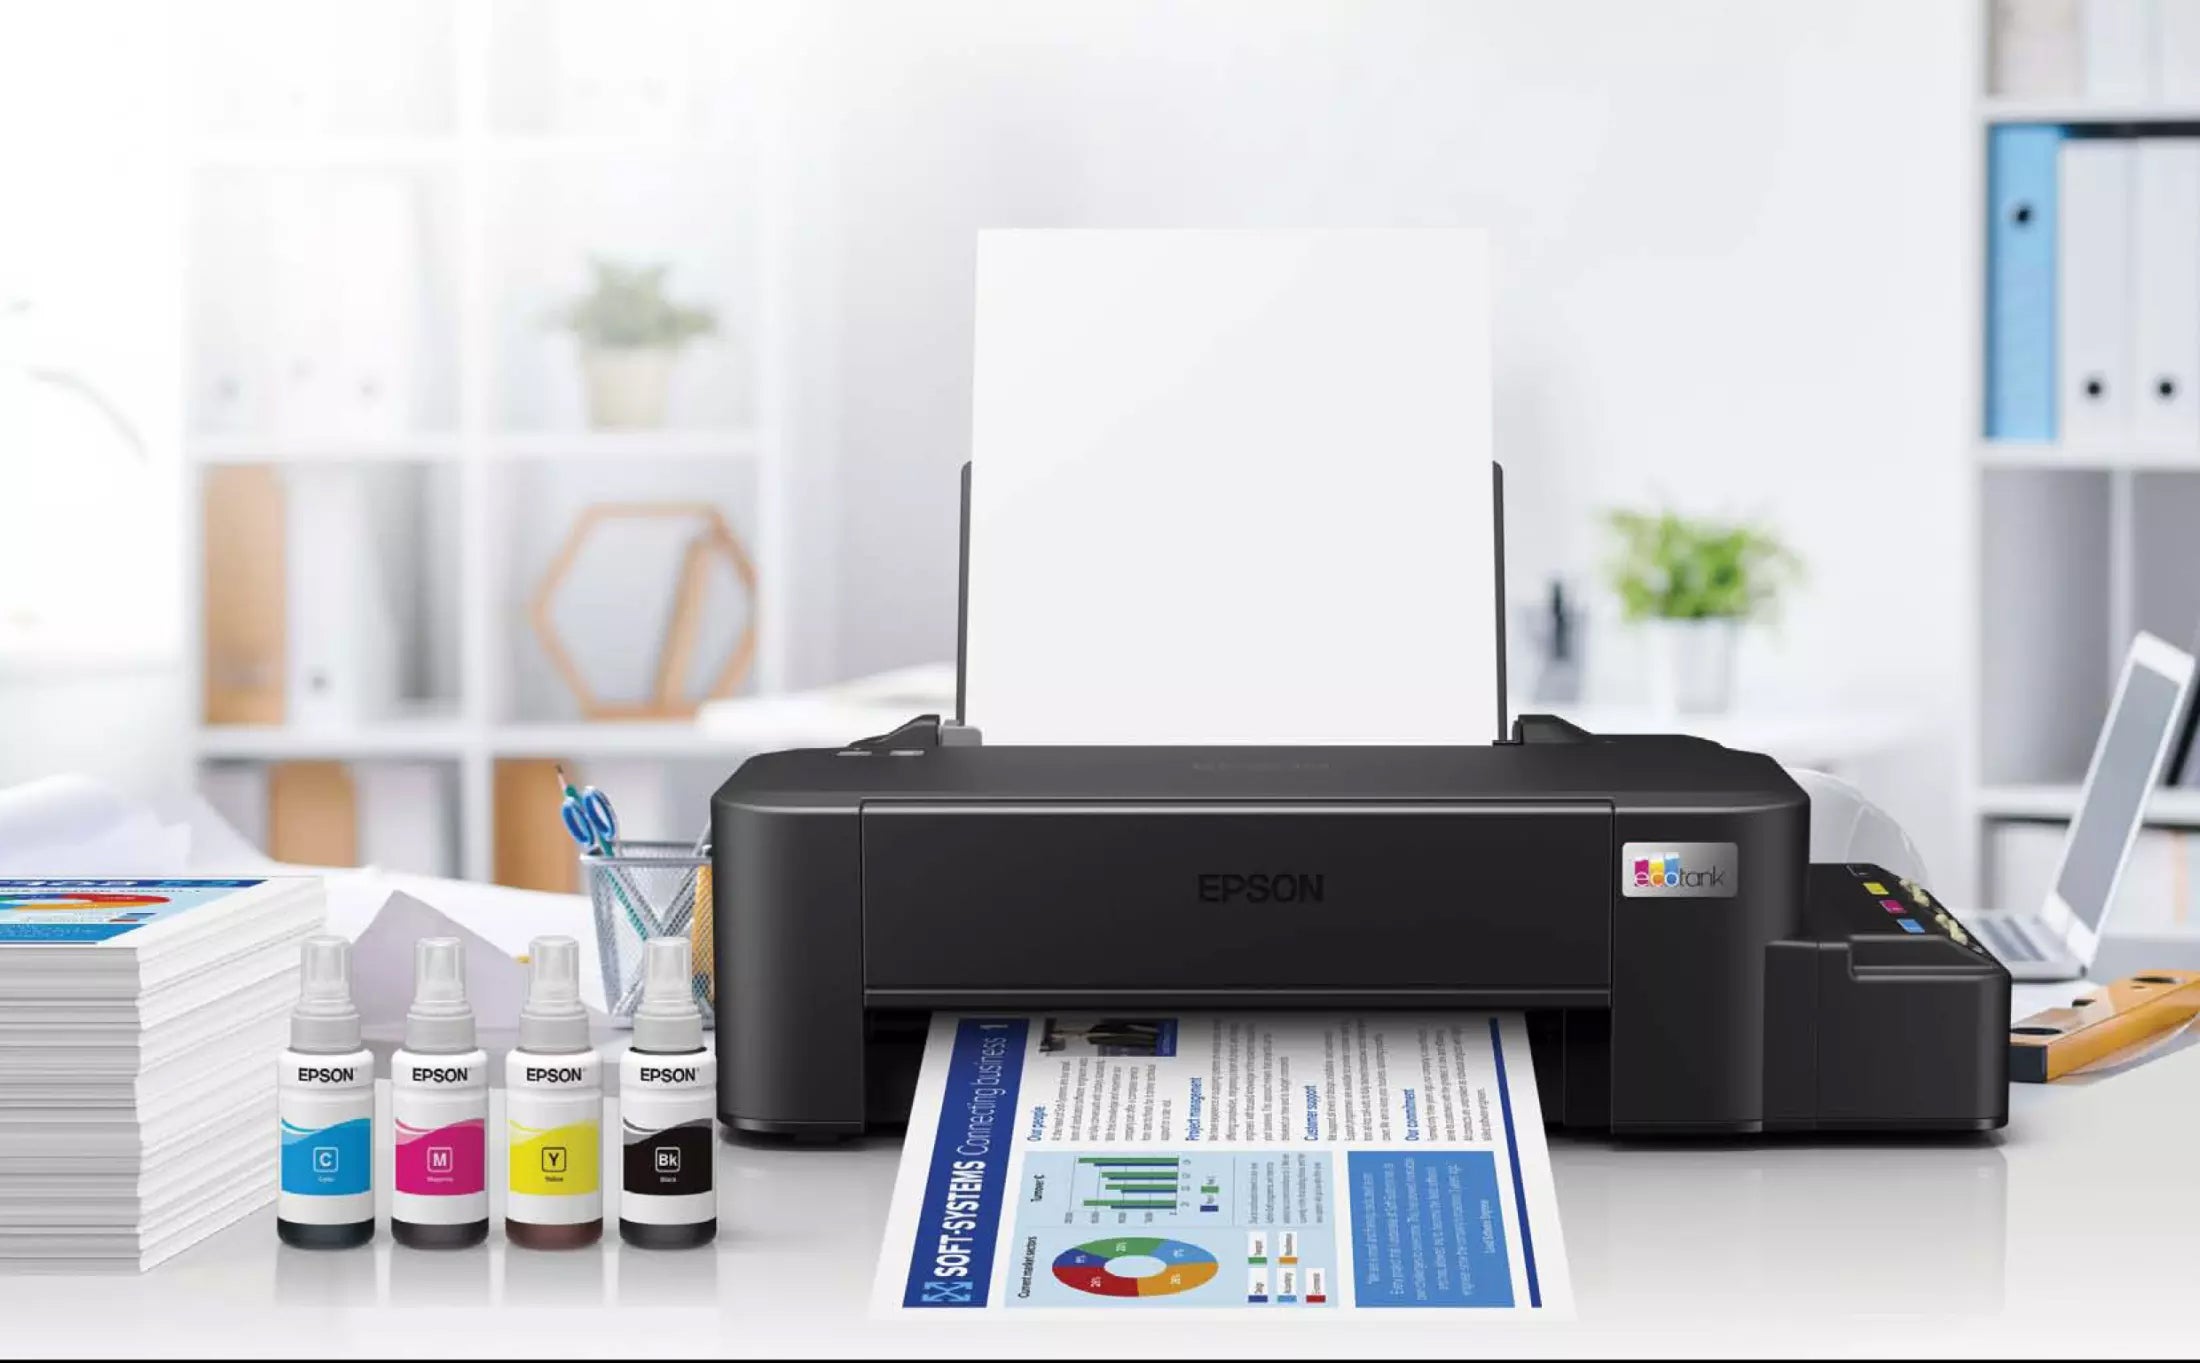 Epson L121 Ink Tank Printer With Free Set Of Inks Brandnew Latest Version Of L120 With Free 5182